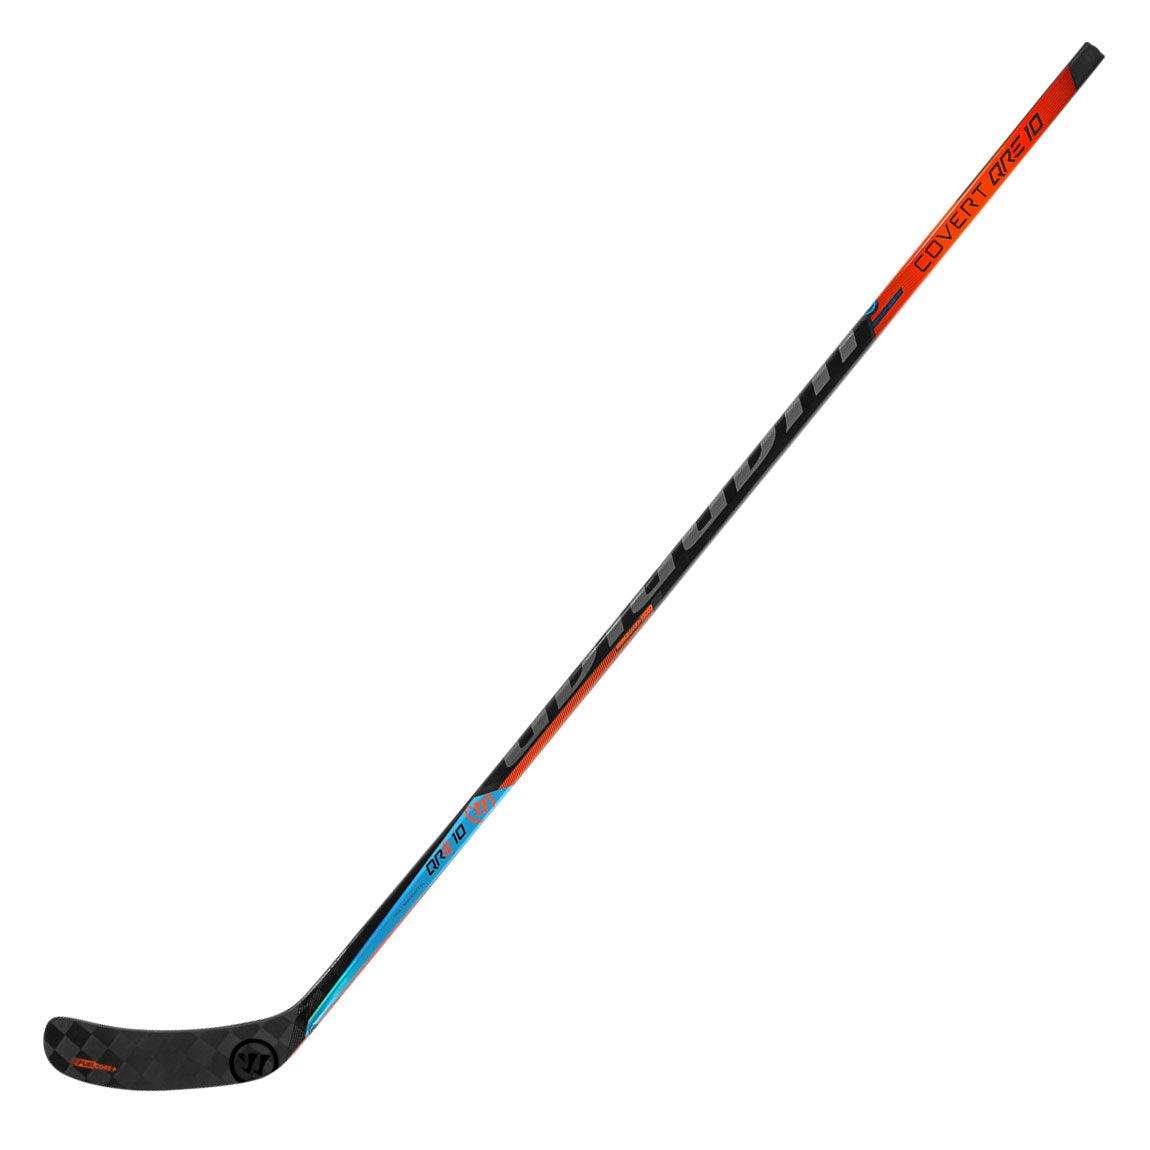 Covert QRE 10 Hockey Stick - Senior - Sports Excellence